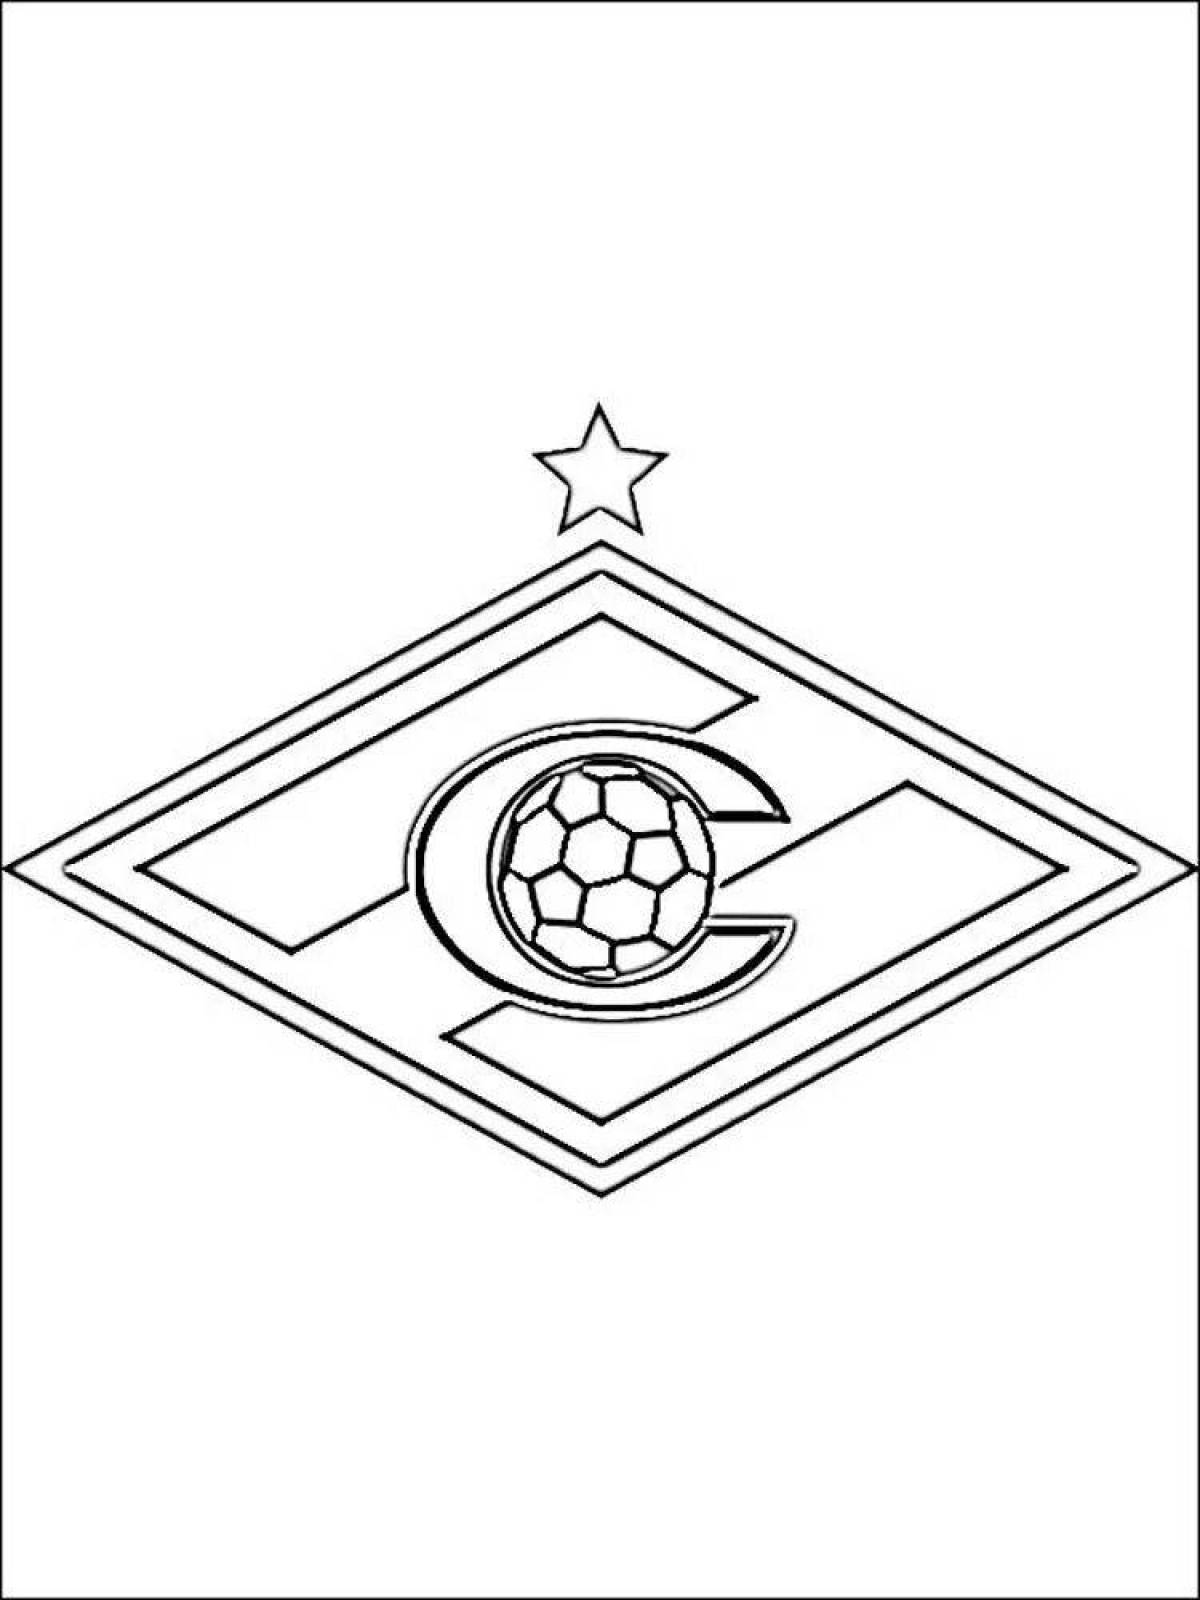 Generous coloring of the emblem of football clubs